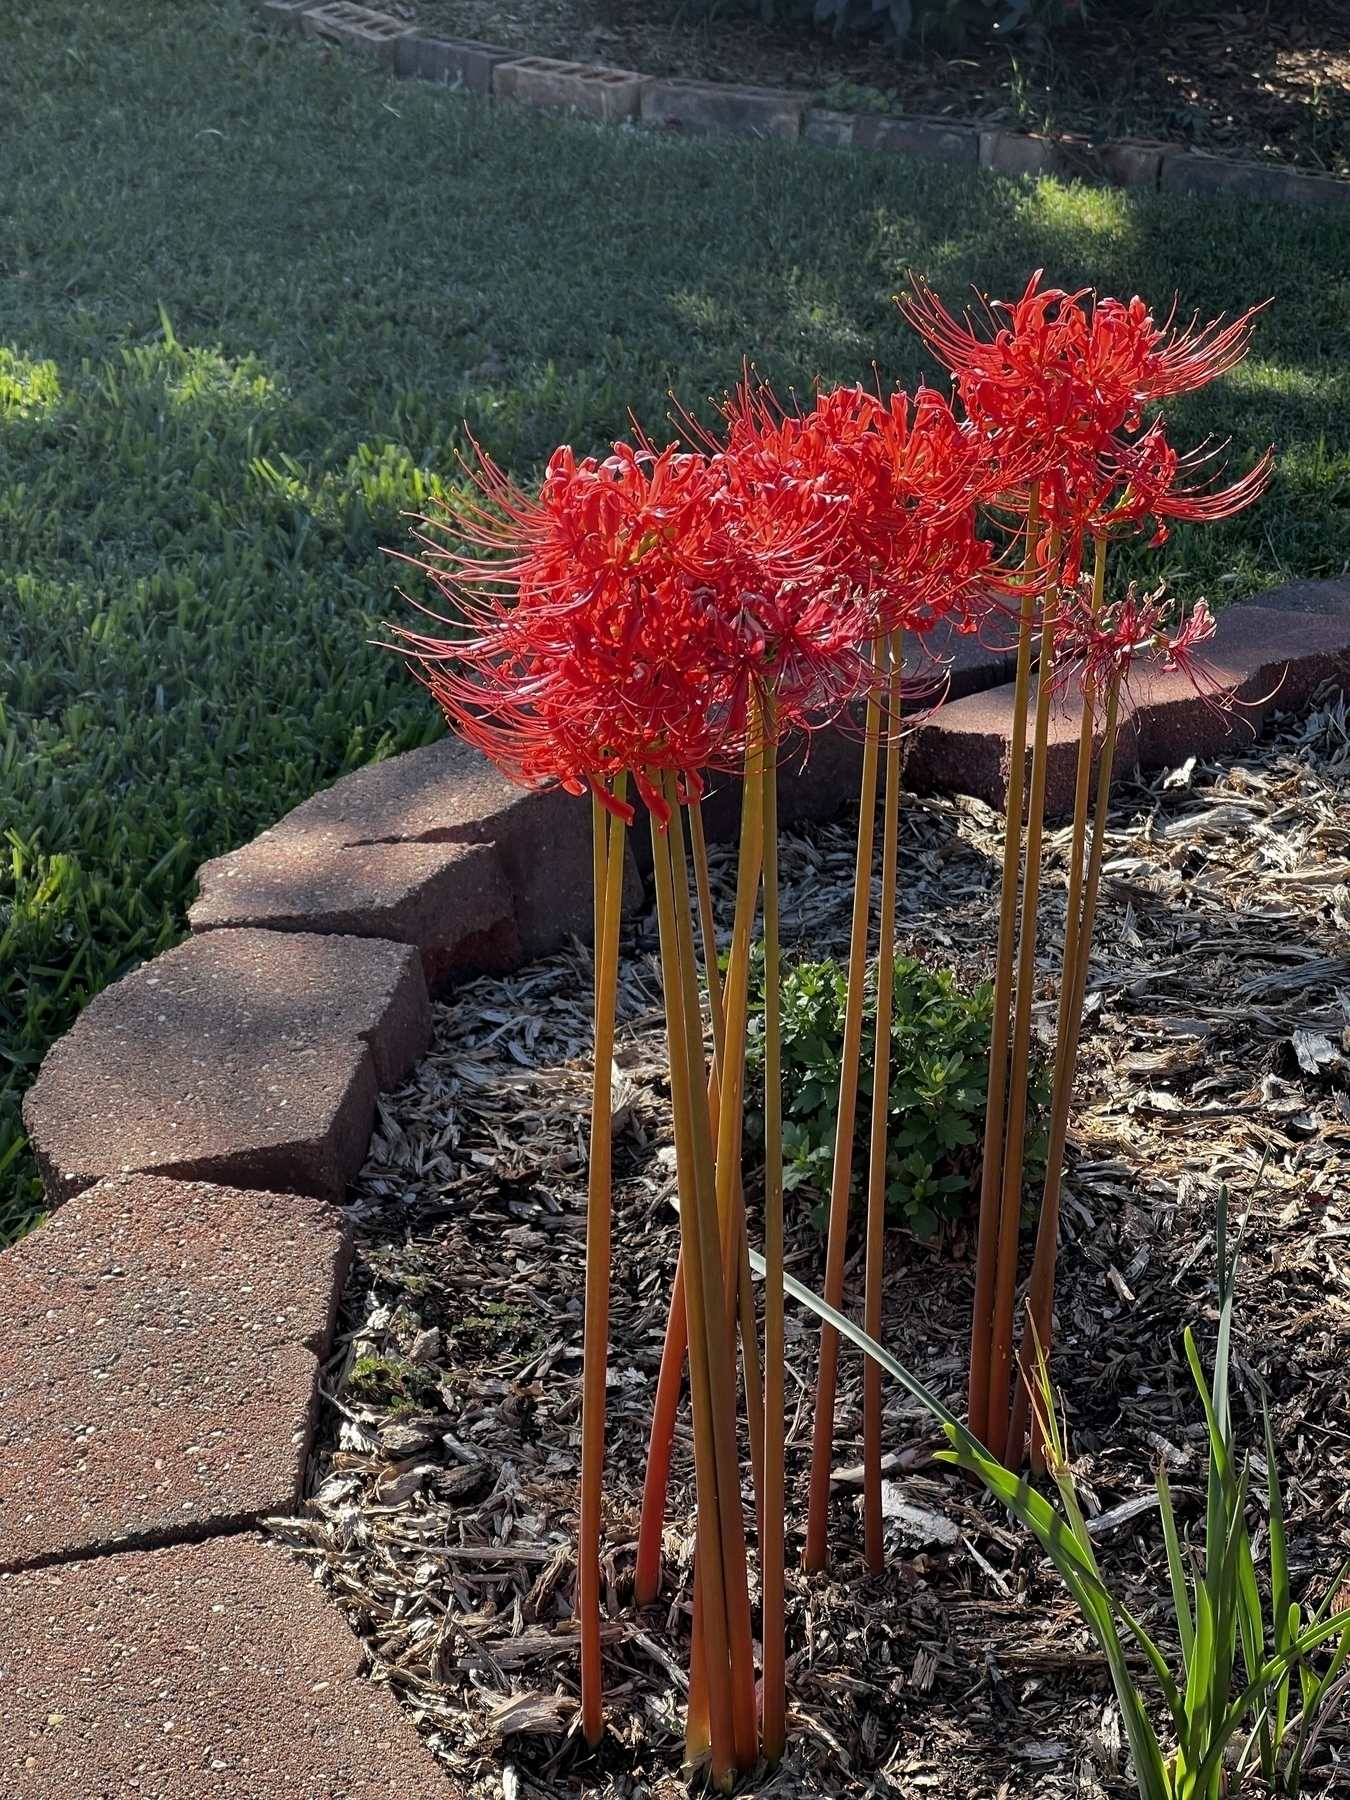 Red spider lily flowers in garden bed. Left side has stone border around lillies. 